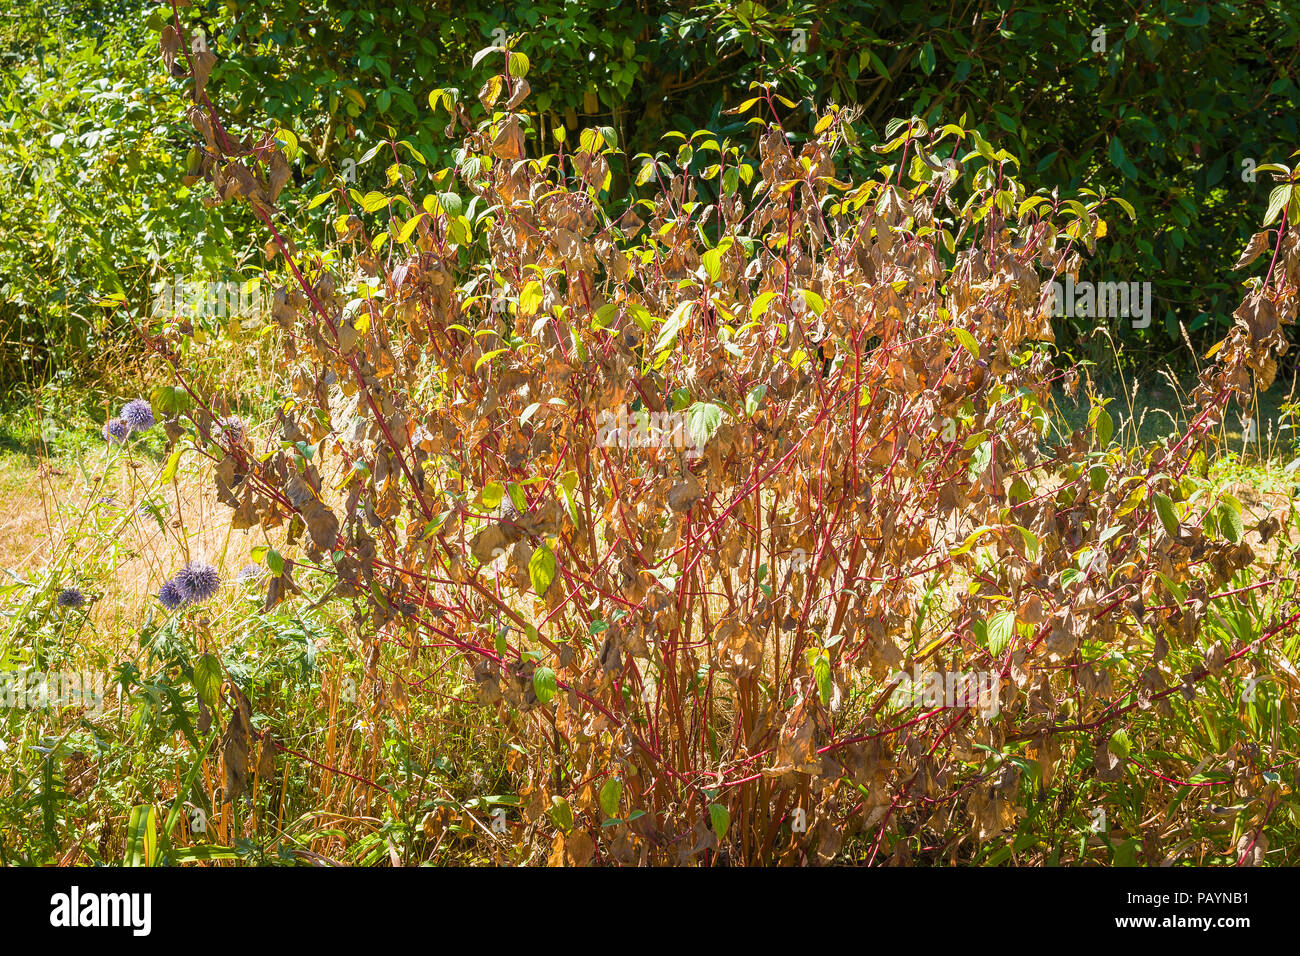 Effect of heatwave in June on a cornus dogwood showing leaves dying before autumn colour in Wiltshire England UK Stock Photo